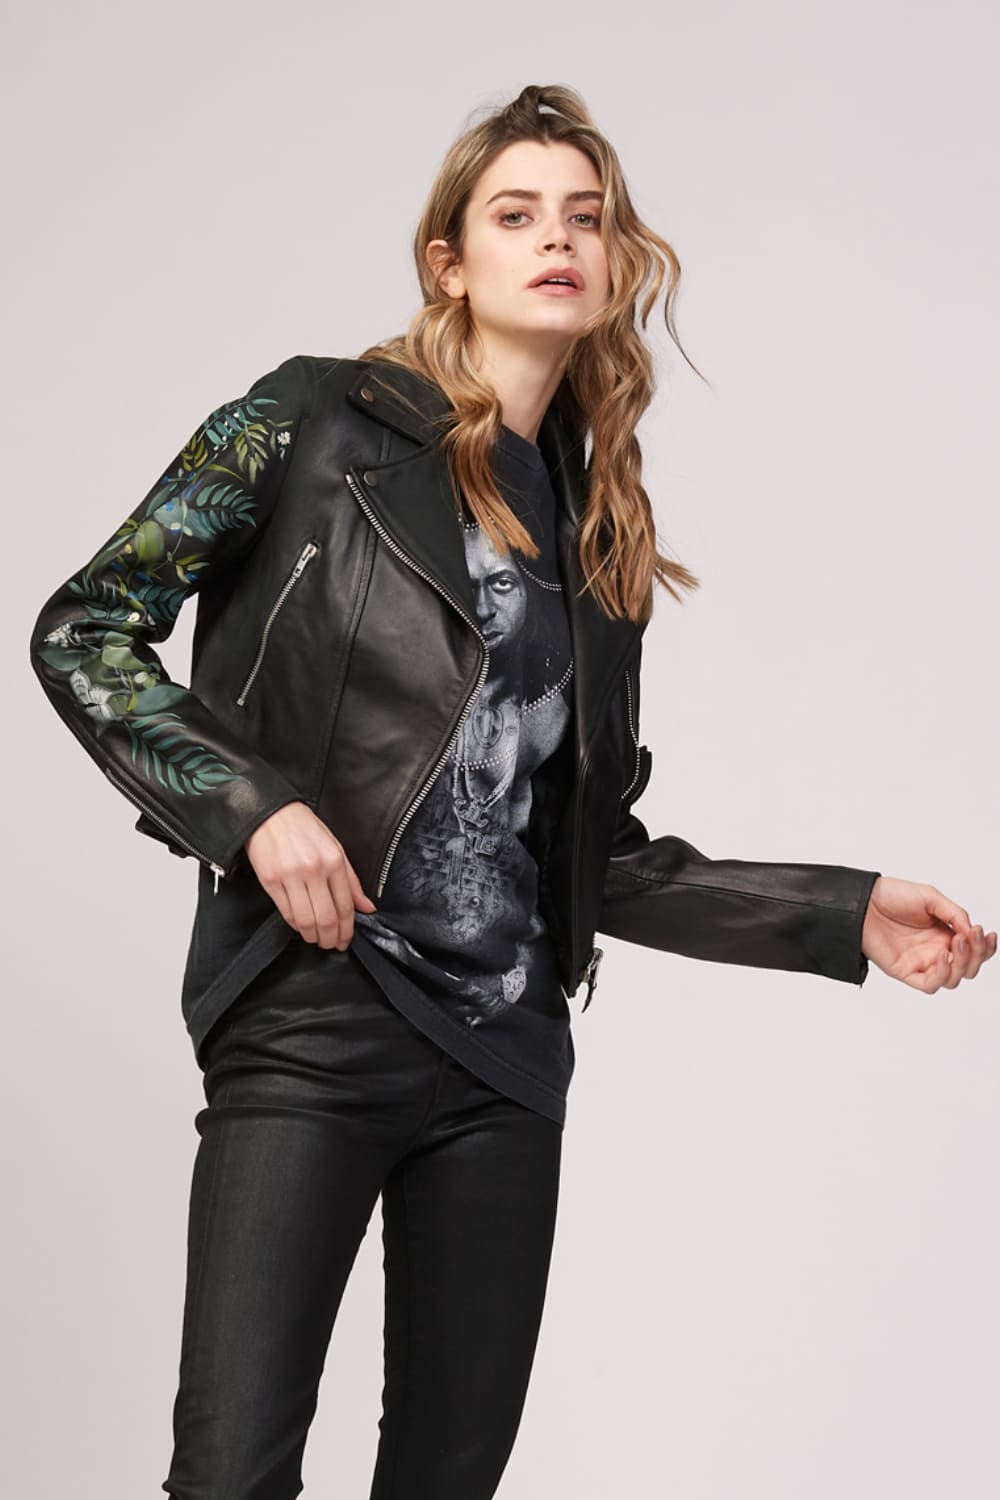 LOU FLOWERS PERFECTO Black leather perfecto with hand painted floral detail on sleeves and back. Asymmetric frontal zip closure. 2 zipped pockets. 100% sheepskin. Made in Italy. HTC LOS ANGELES